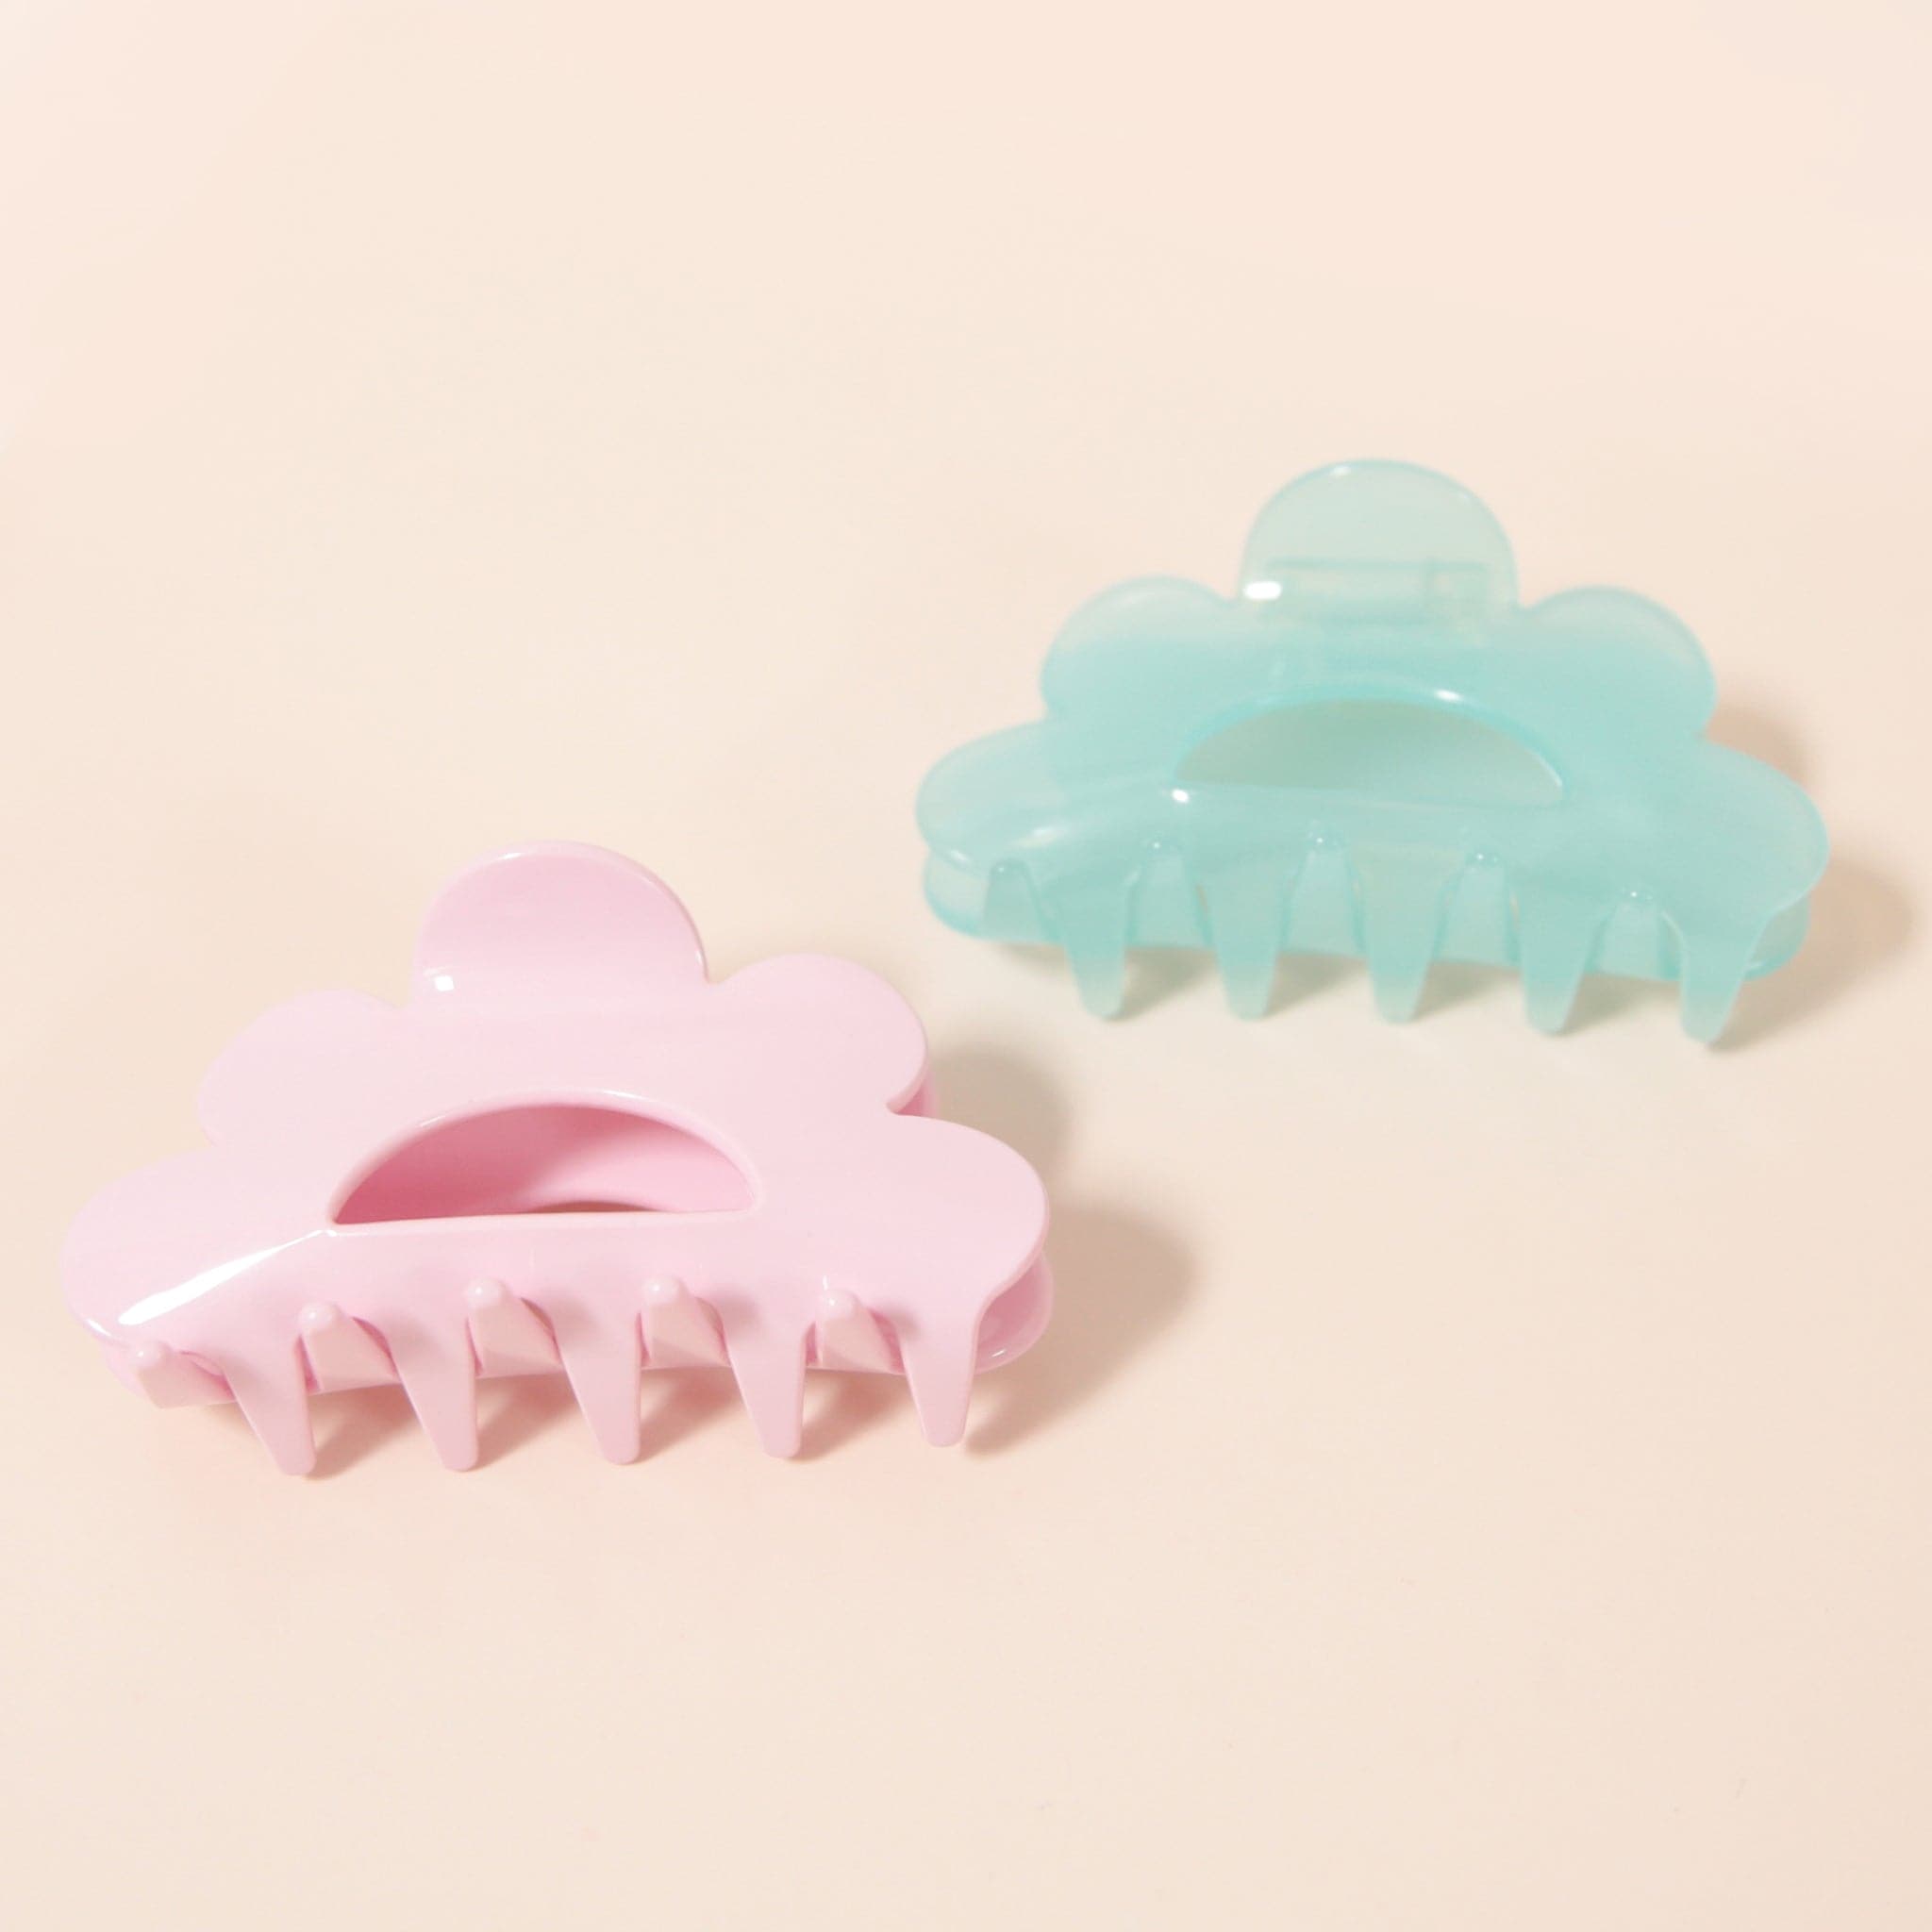 A lilac scalloped claw clip made of durable plastic.